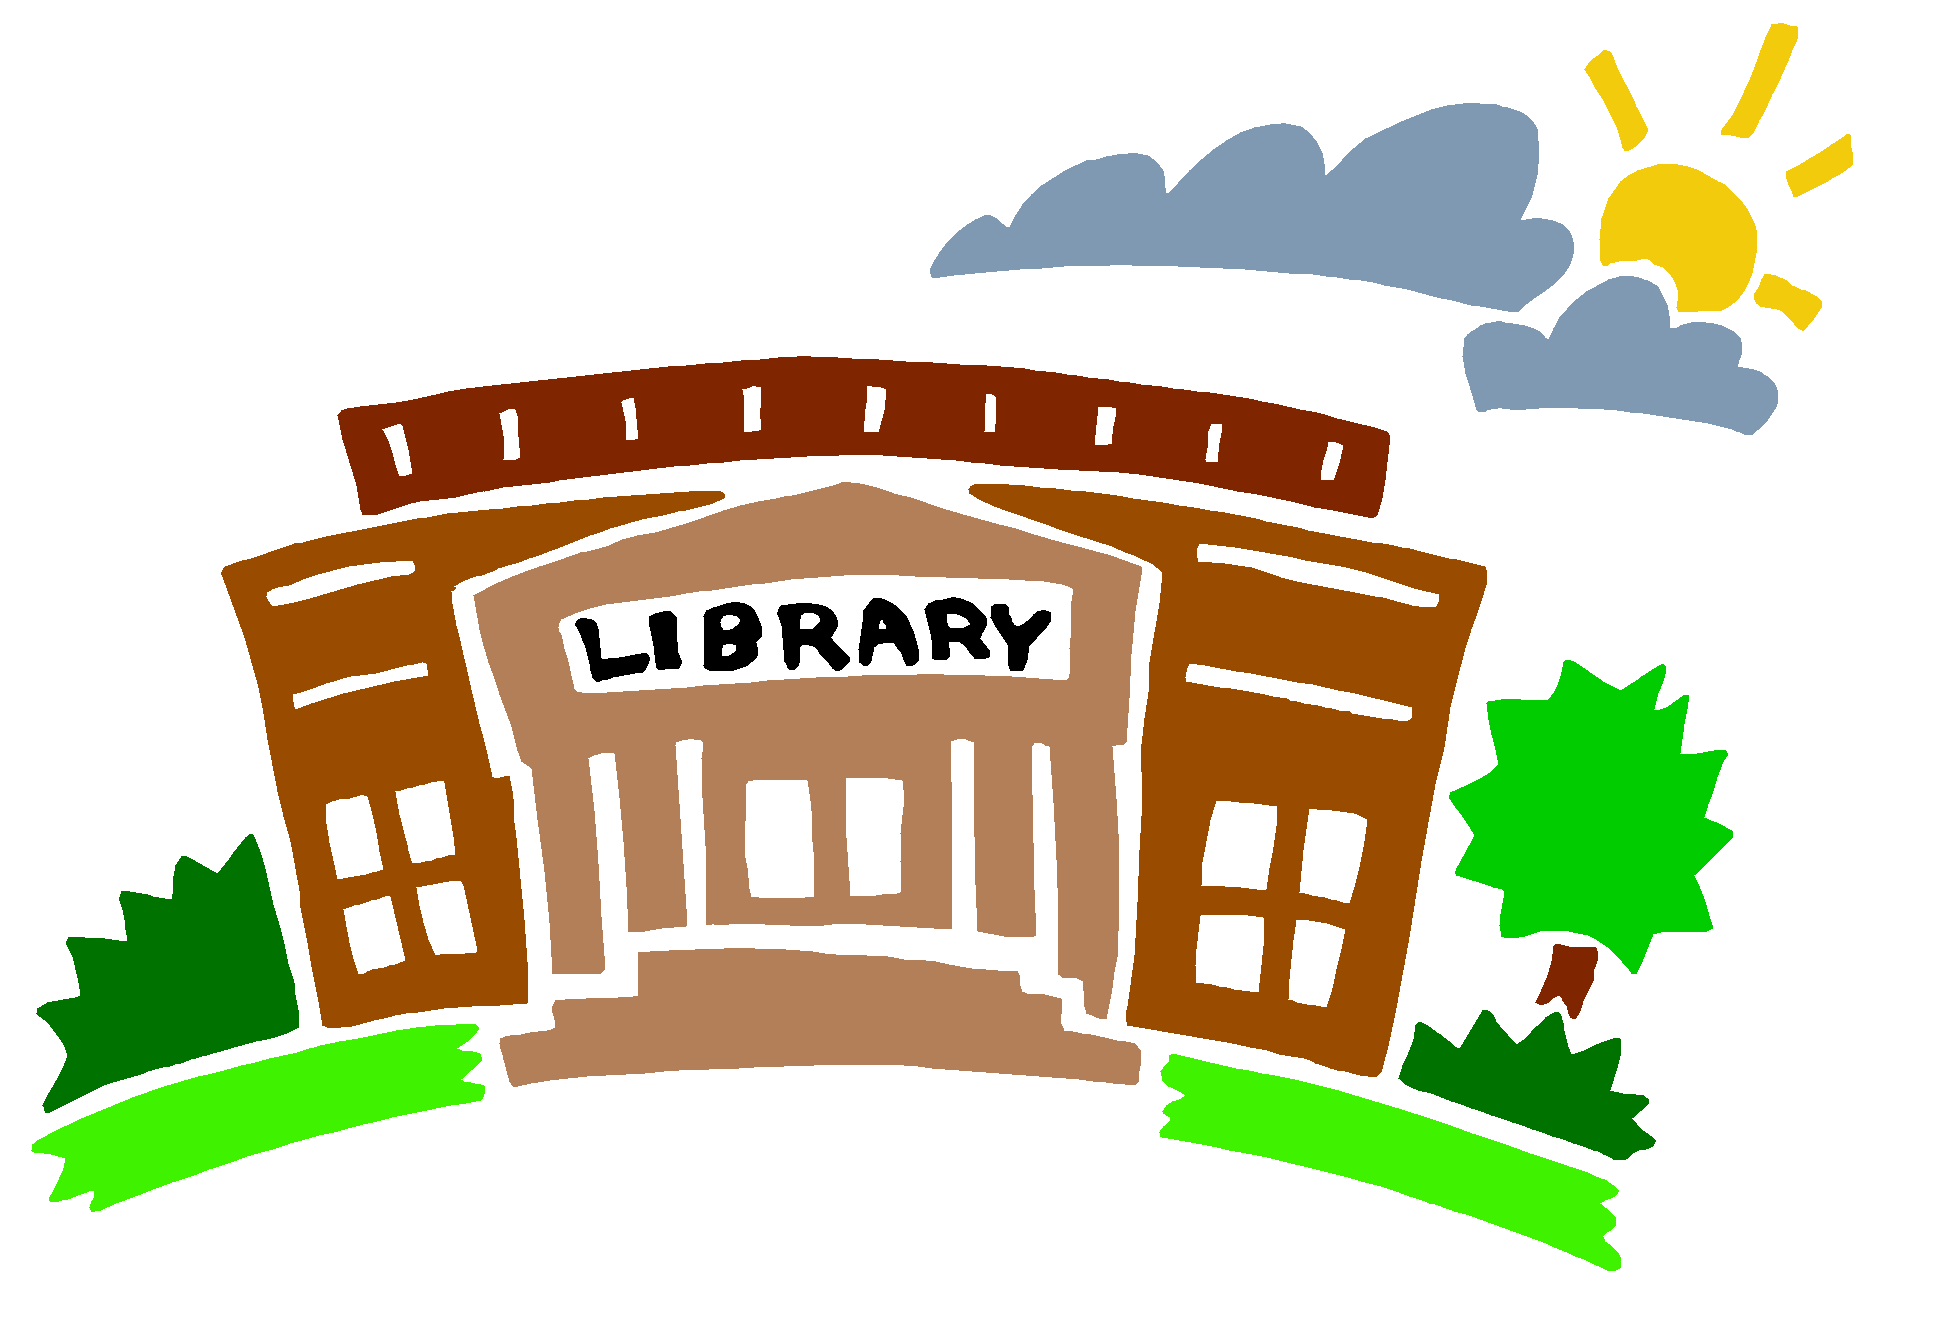 Library clipart public library, Library public library